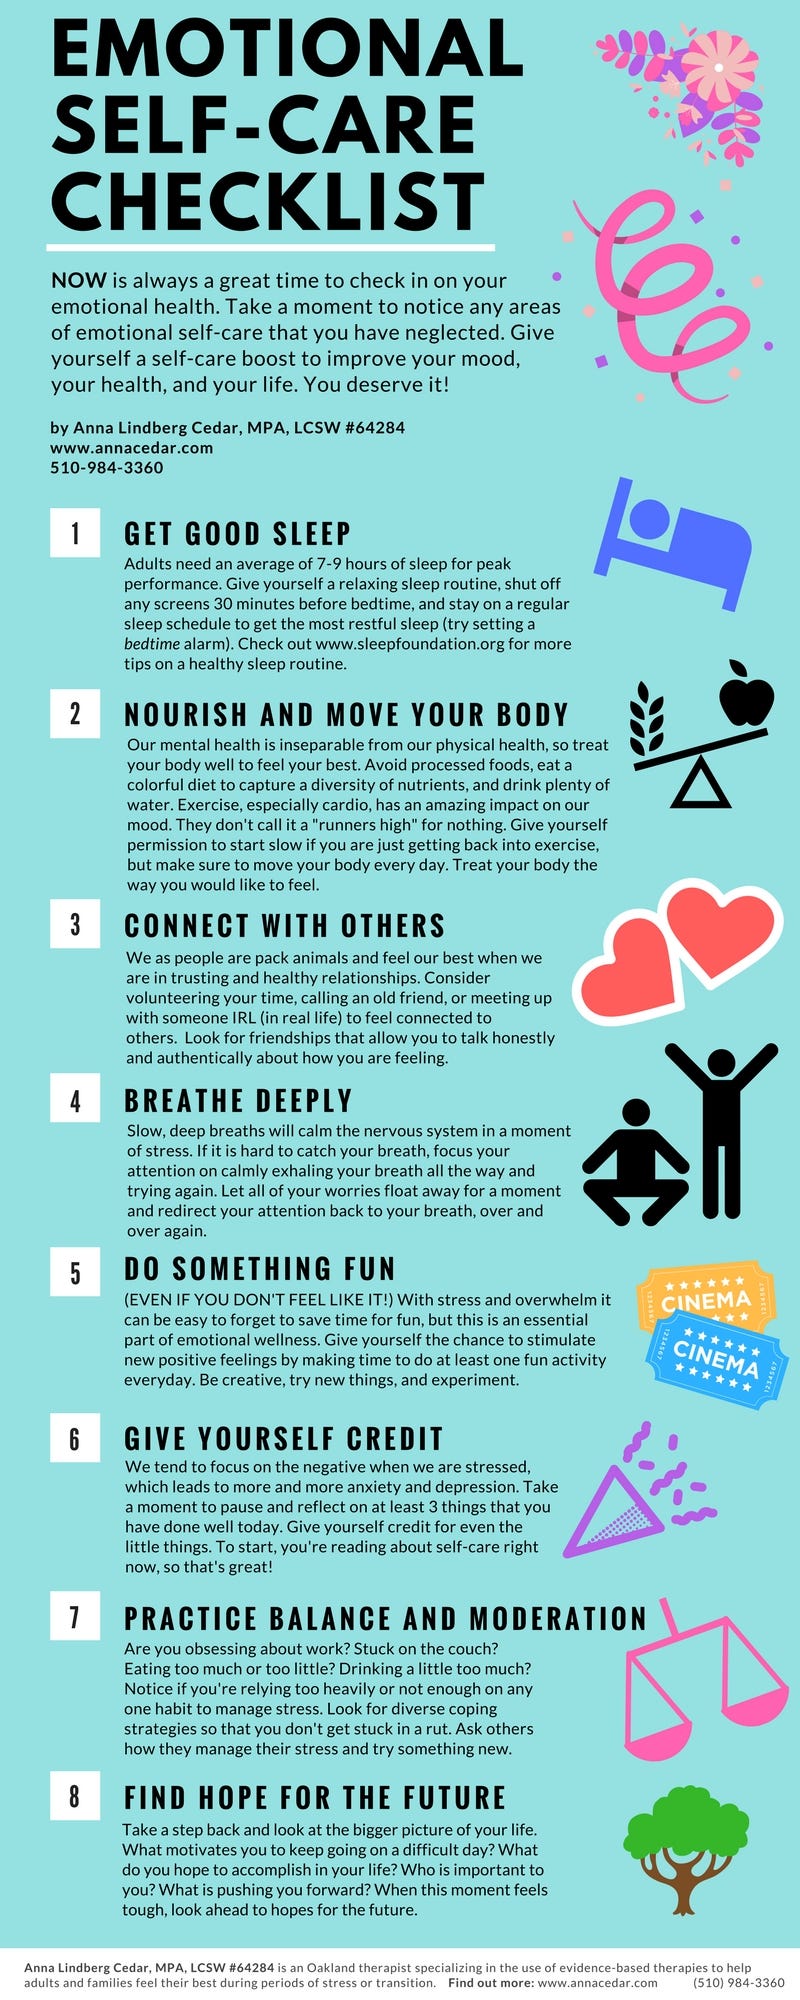 Emotional Self-Care Checklist. If you think others could benefit